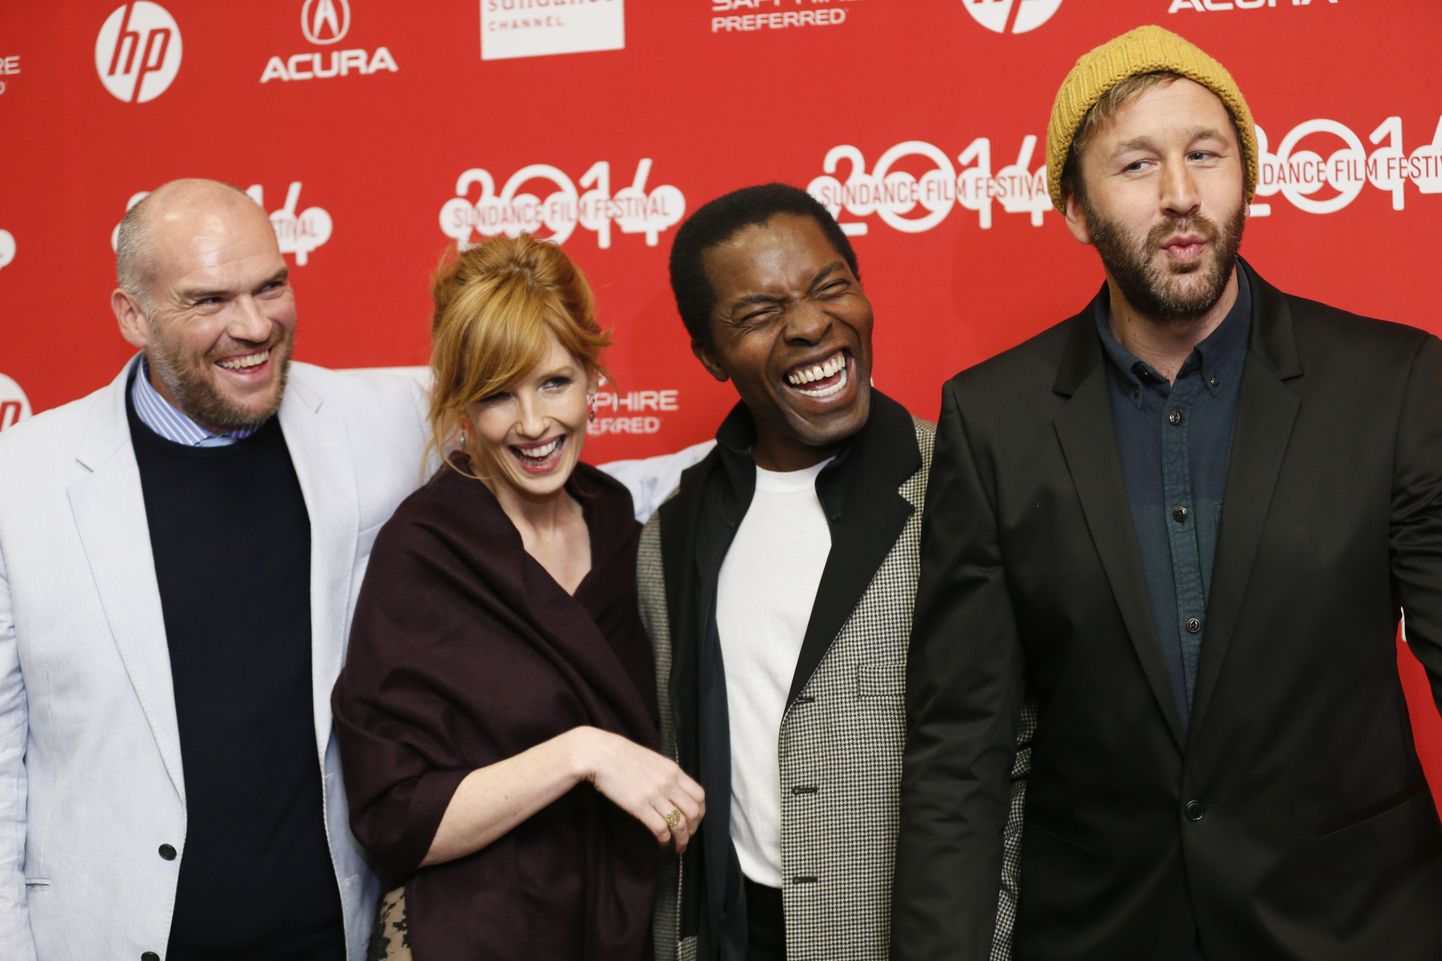 From left to right, writer and director John Michael McDonagh and cast members Kelly Reilly, Isaach De Bankole, and Chris O'Dowd laugh together as they pose at the premiere of the film "Calvary" during the 2014 Sundance Film Festival, on Sunday, Jan. 19, 2014 in Park City, Utah. (Photo by Danny Moloshok/Invision/AP) / TT / kod 436